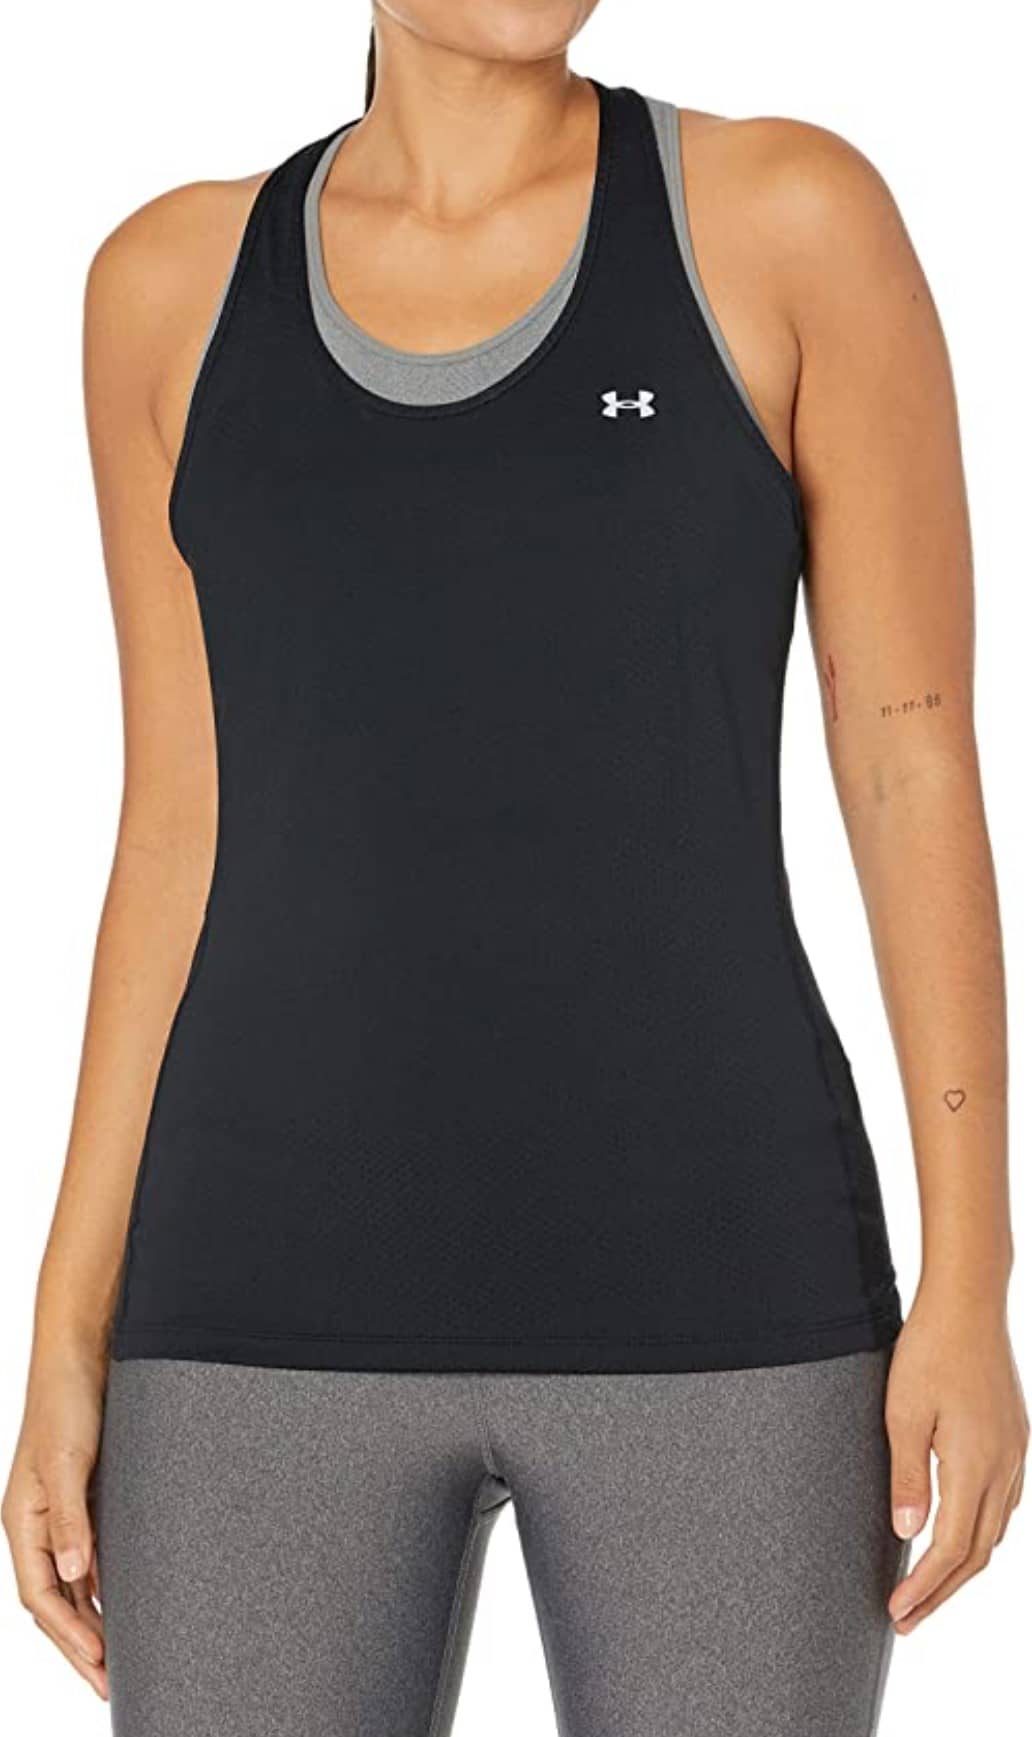 athletic top for women